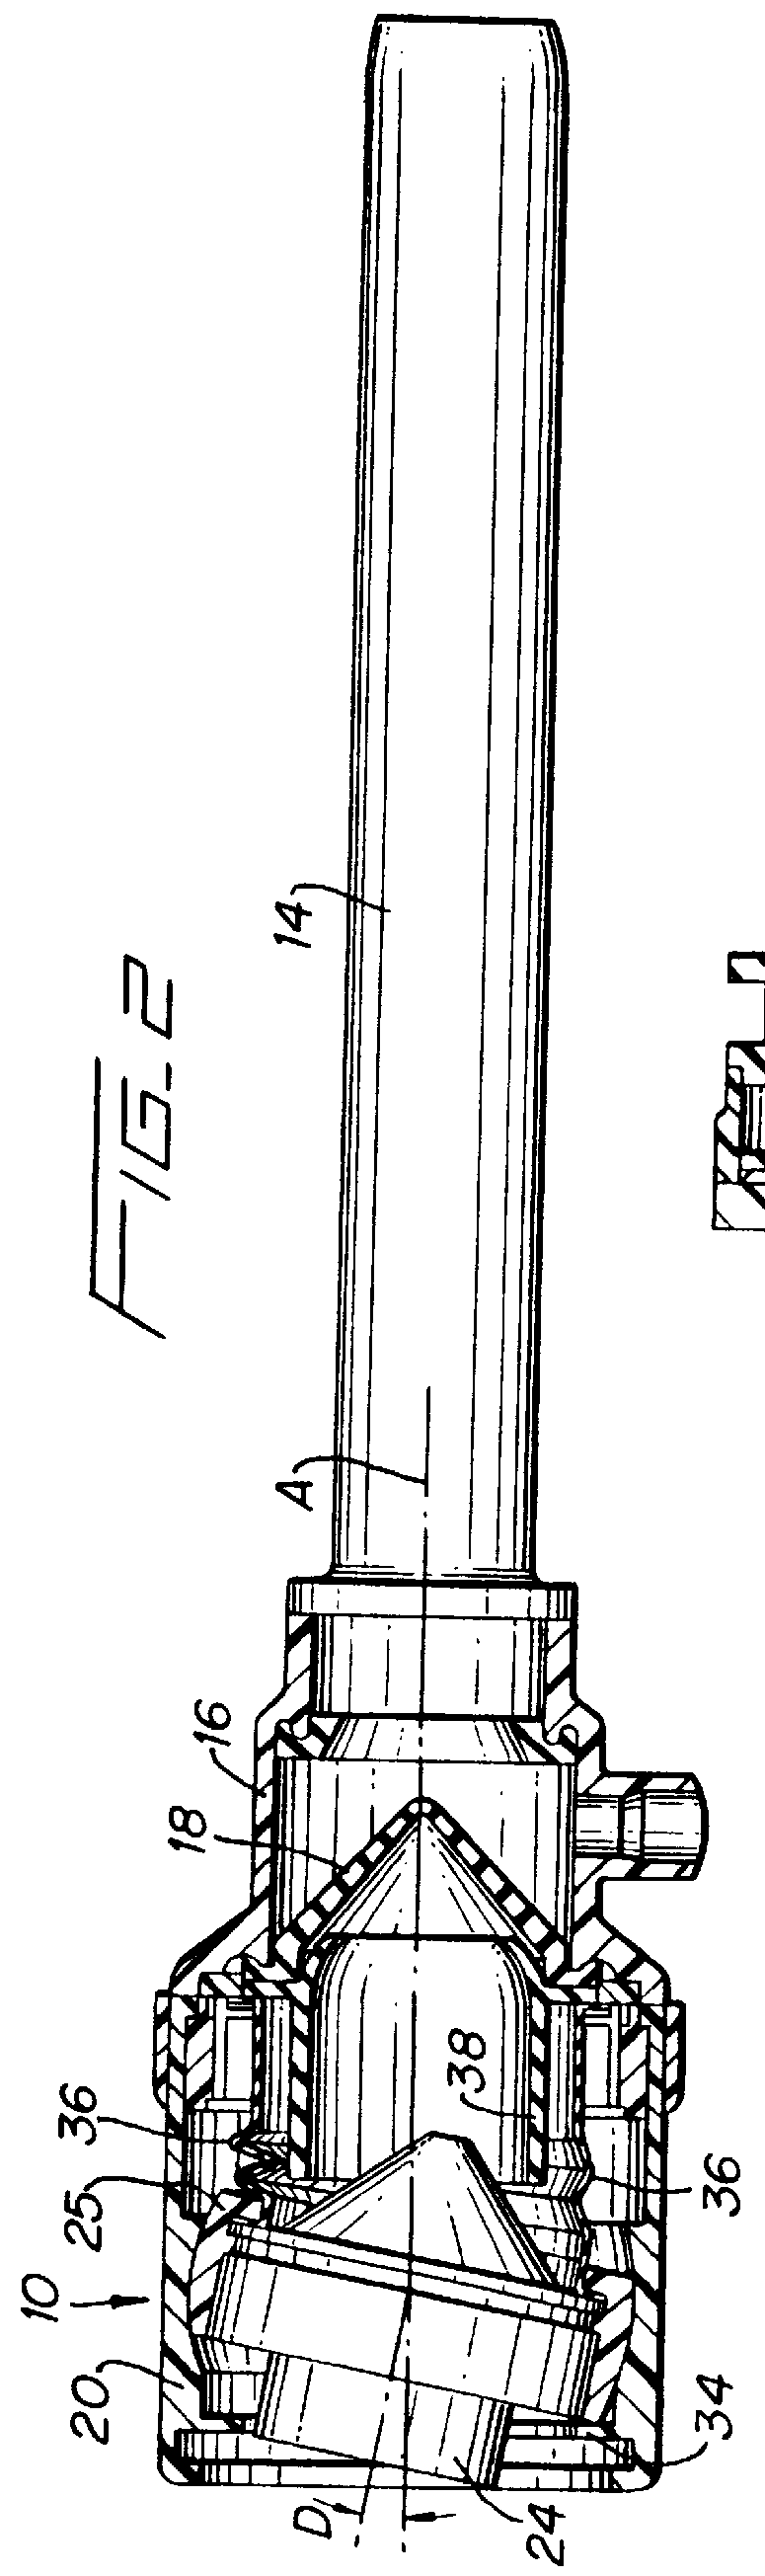 Seal assembly for accommodating introduction of surgical instruments